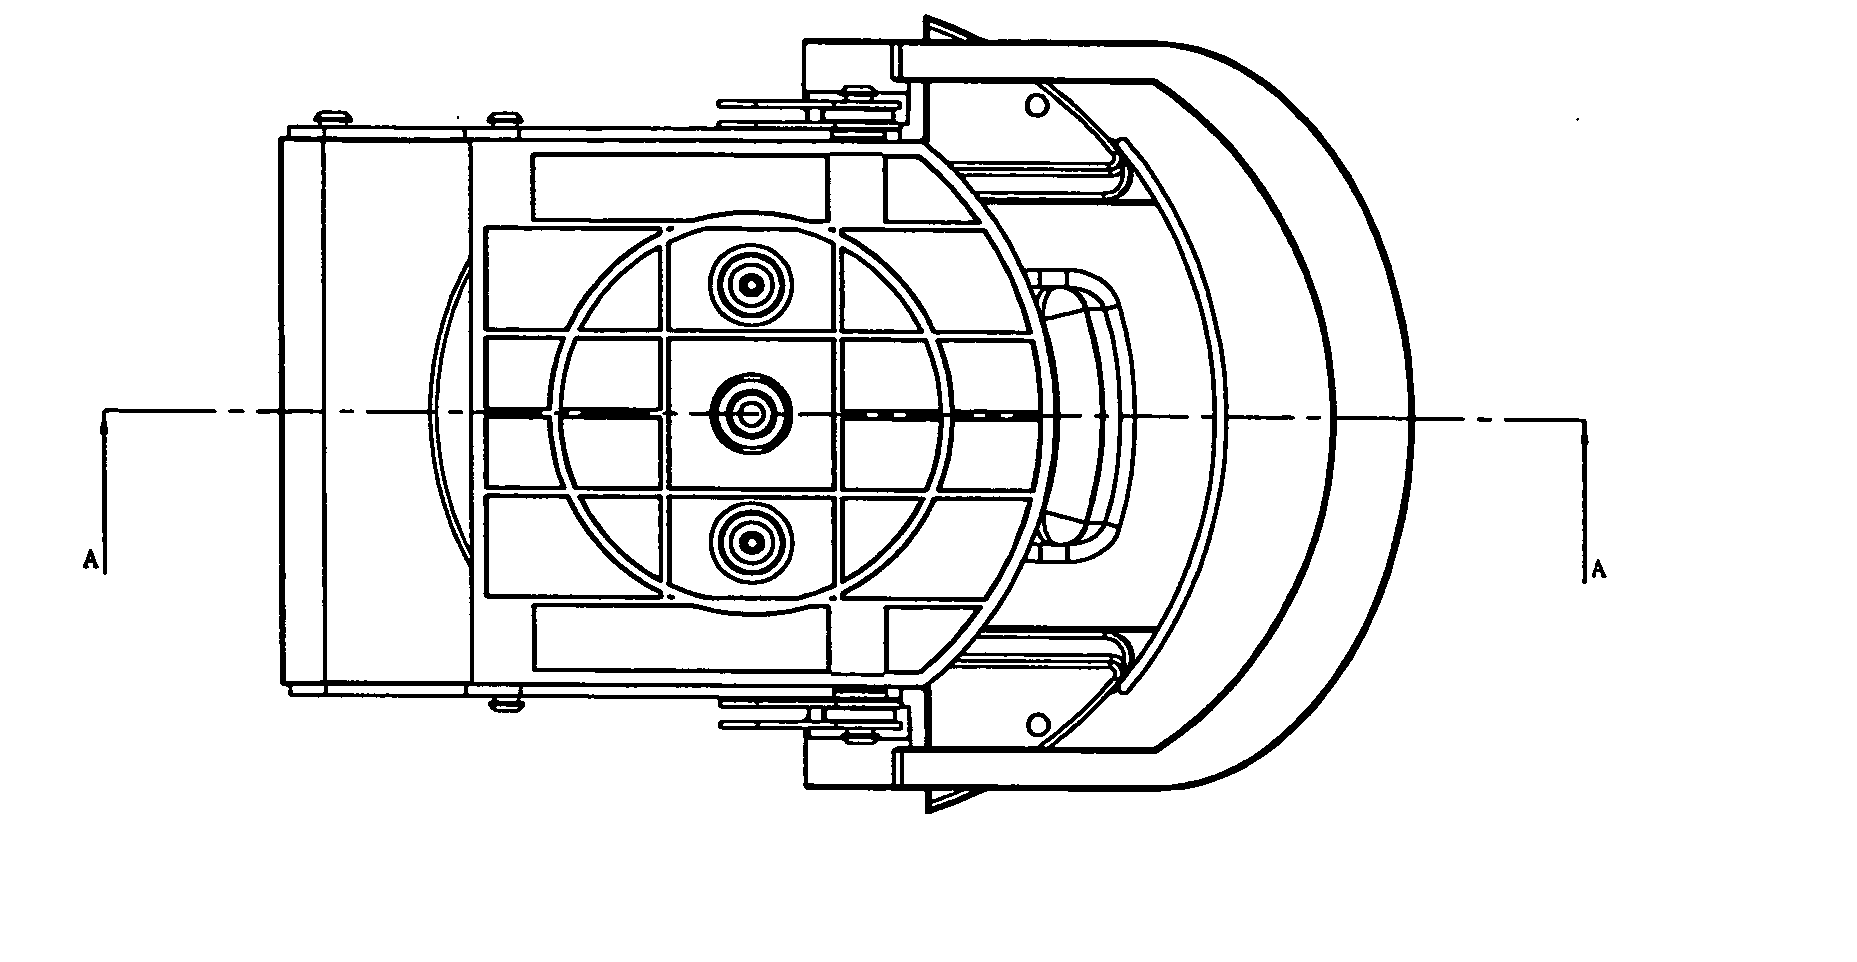 Cabinet design of filter holder for pressurized coffee machines